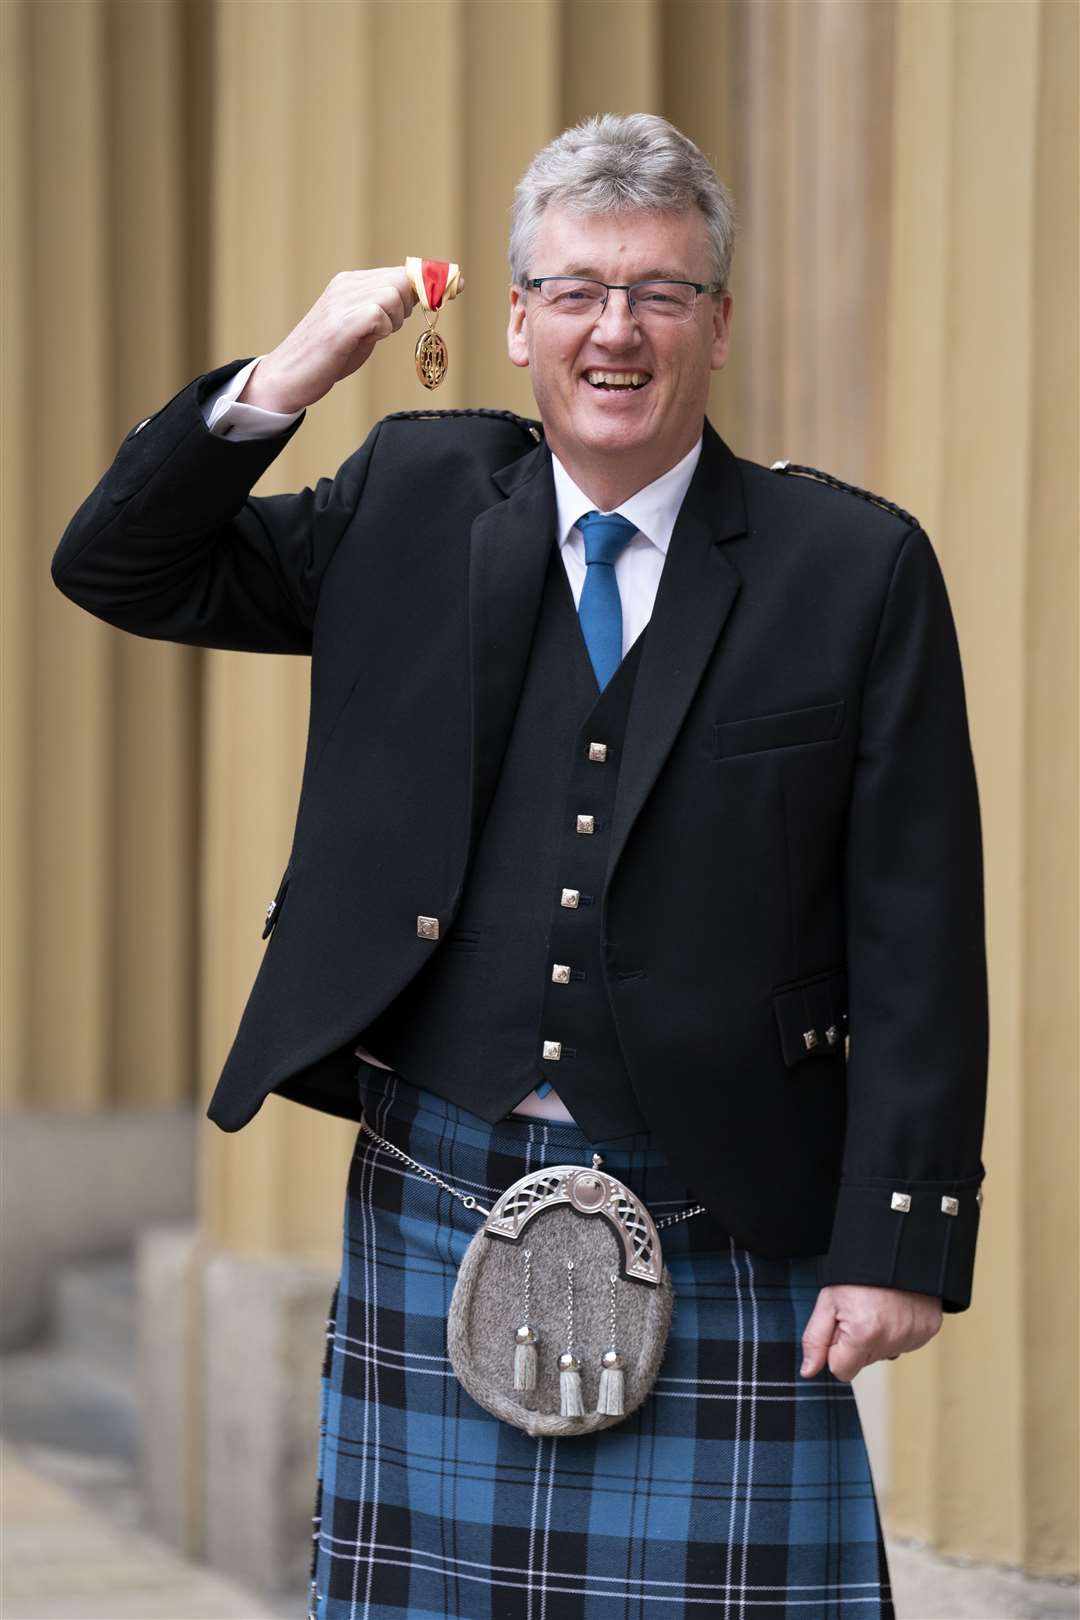 Sir David MacMillan after being knighted at Buckingham Palace (Kirsty O’Connor/PA Wire)